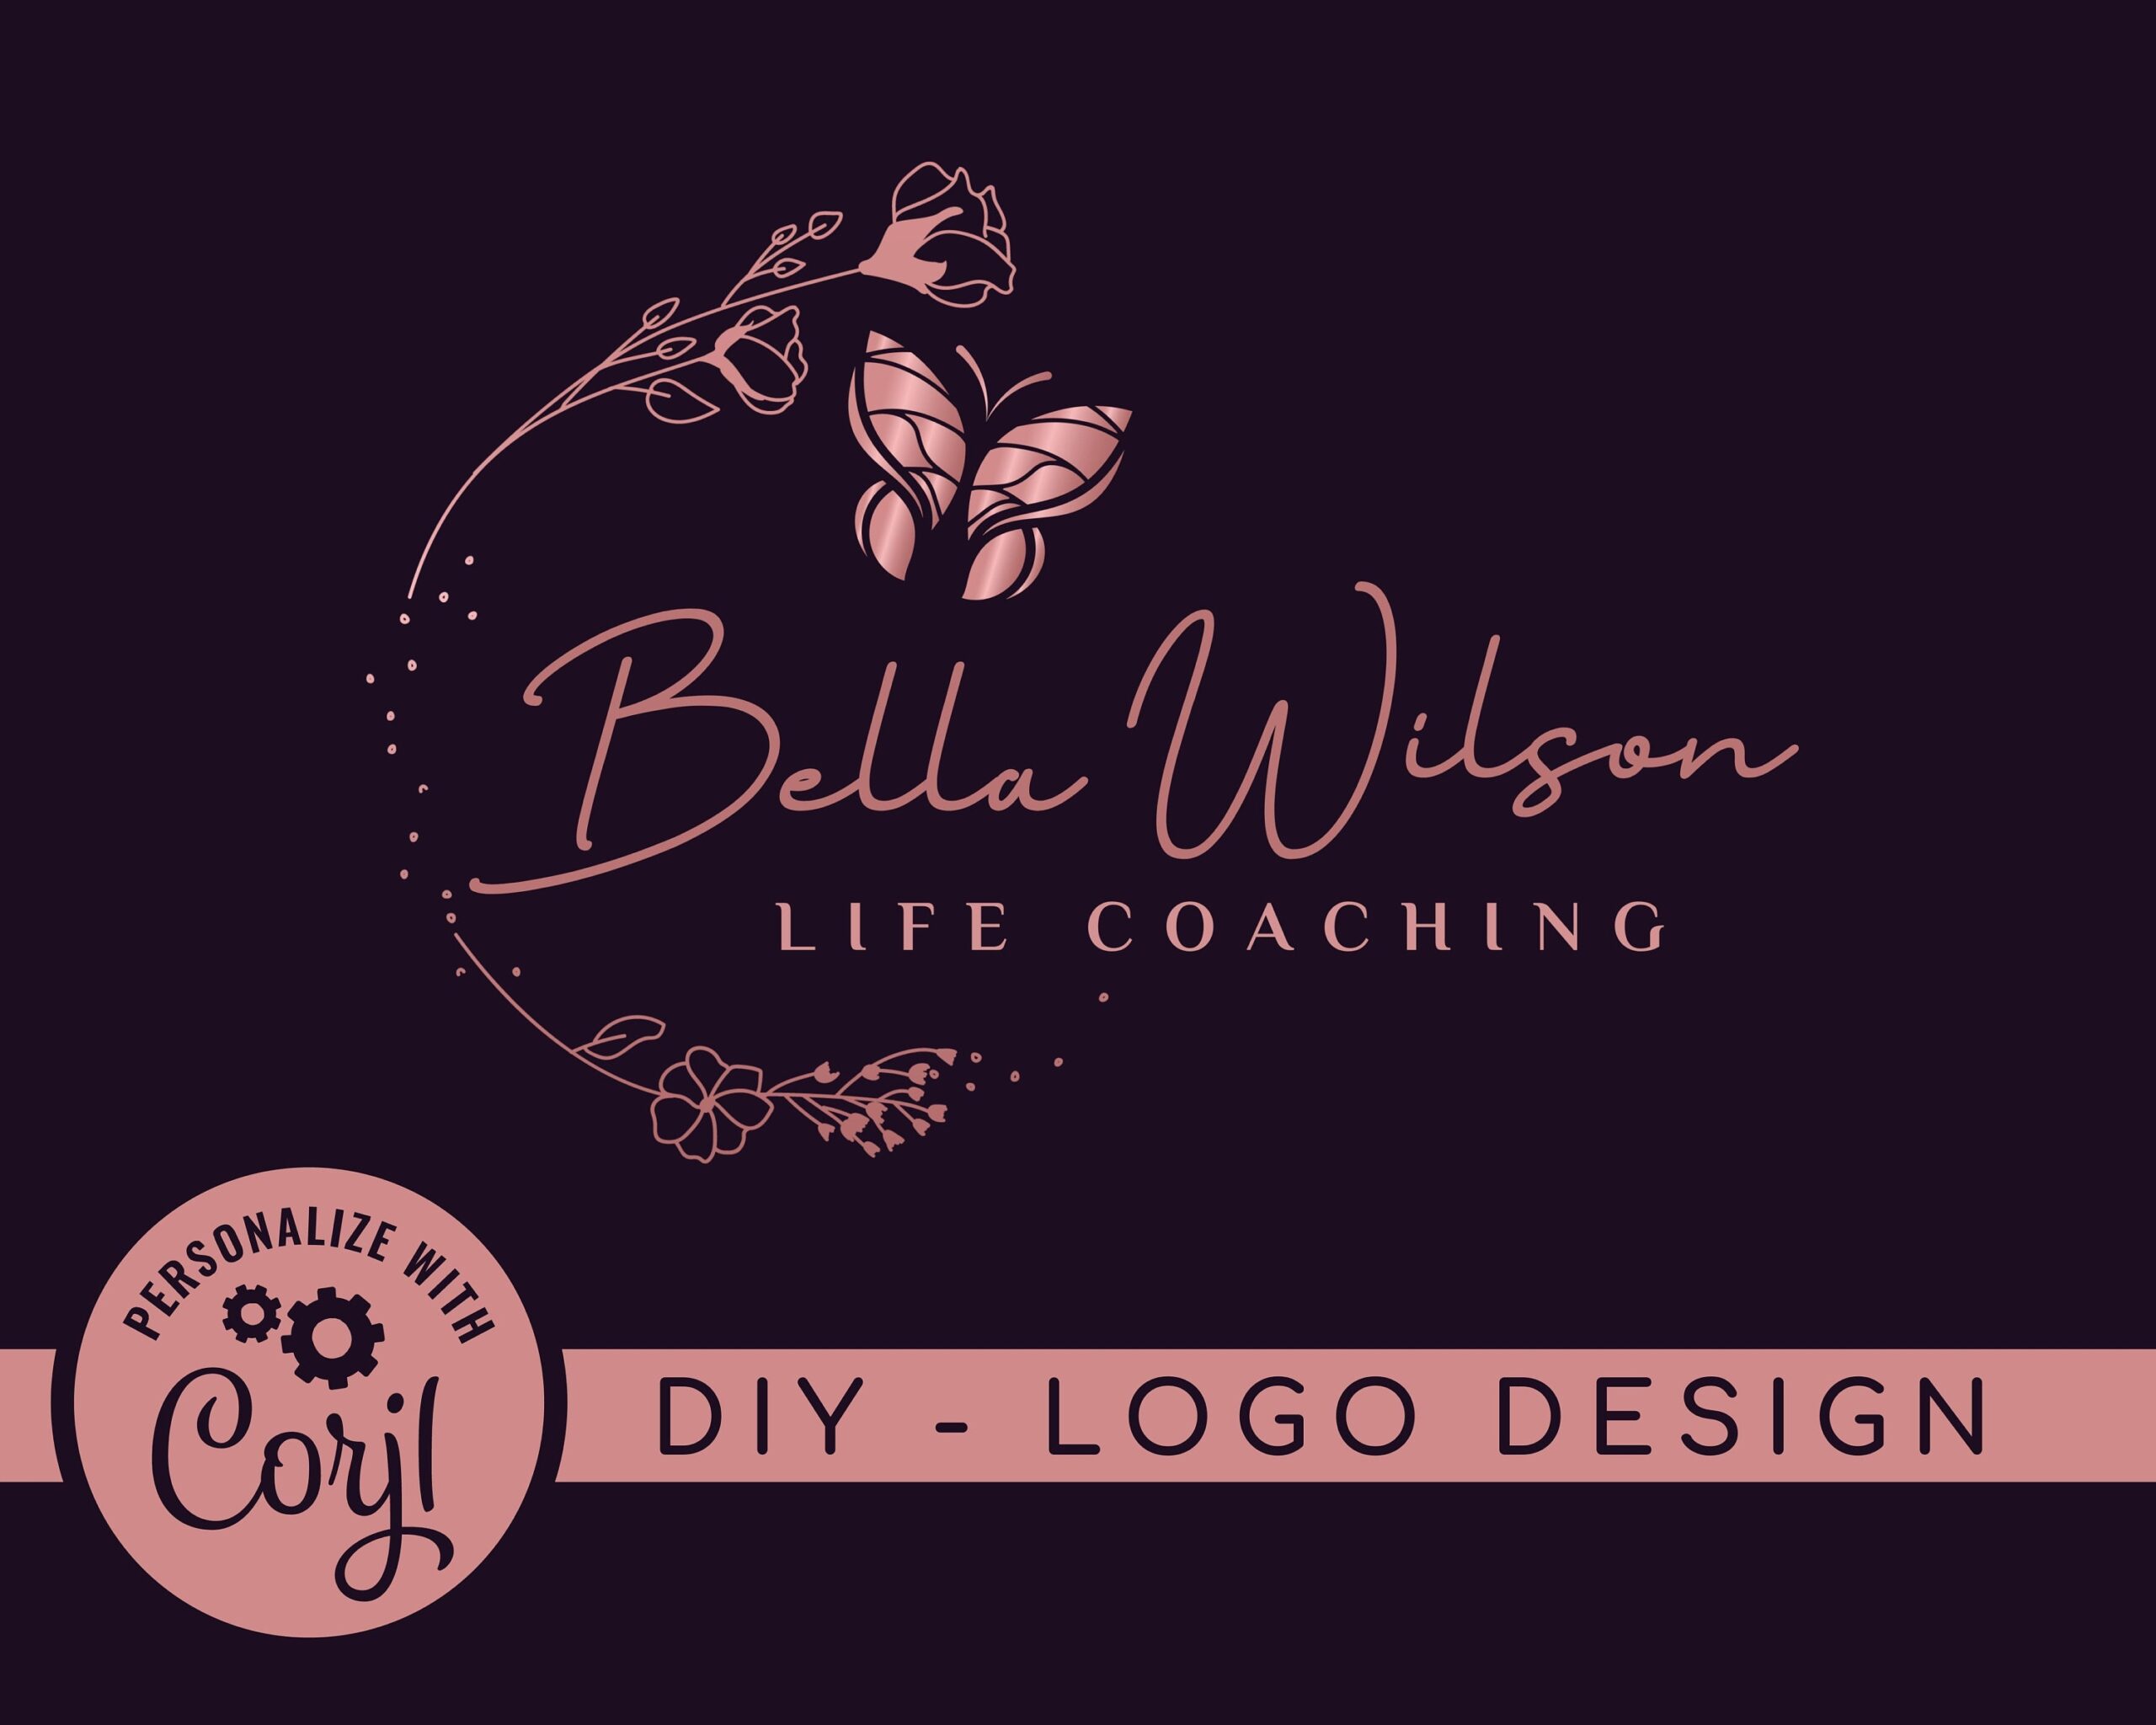 Editable Logo Design -  Rose Gold Life Coaching Butterfly -  Nature and Beauty DIY Design Template -  Wellness Life Coaching Logo -  Premade Logo